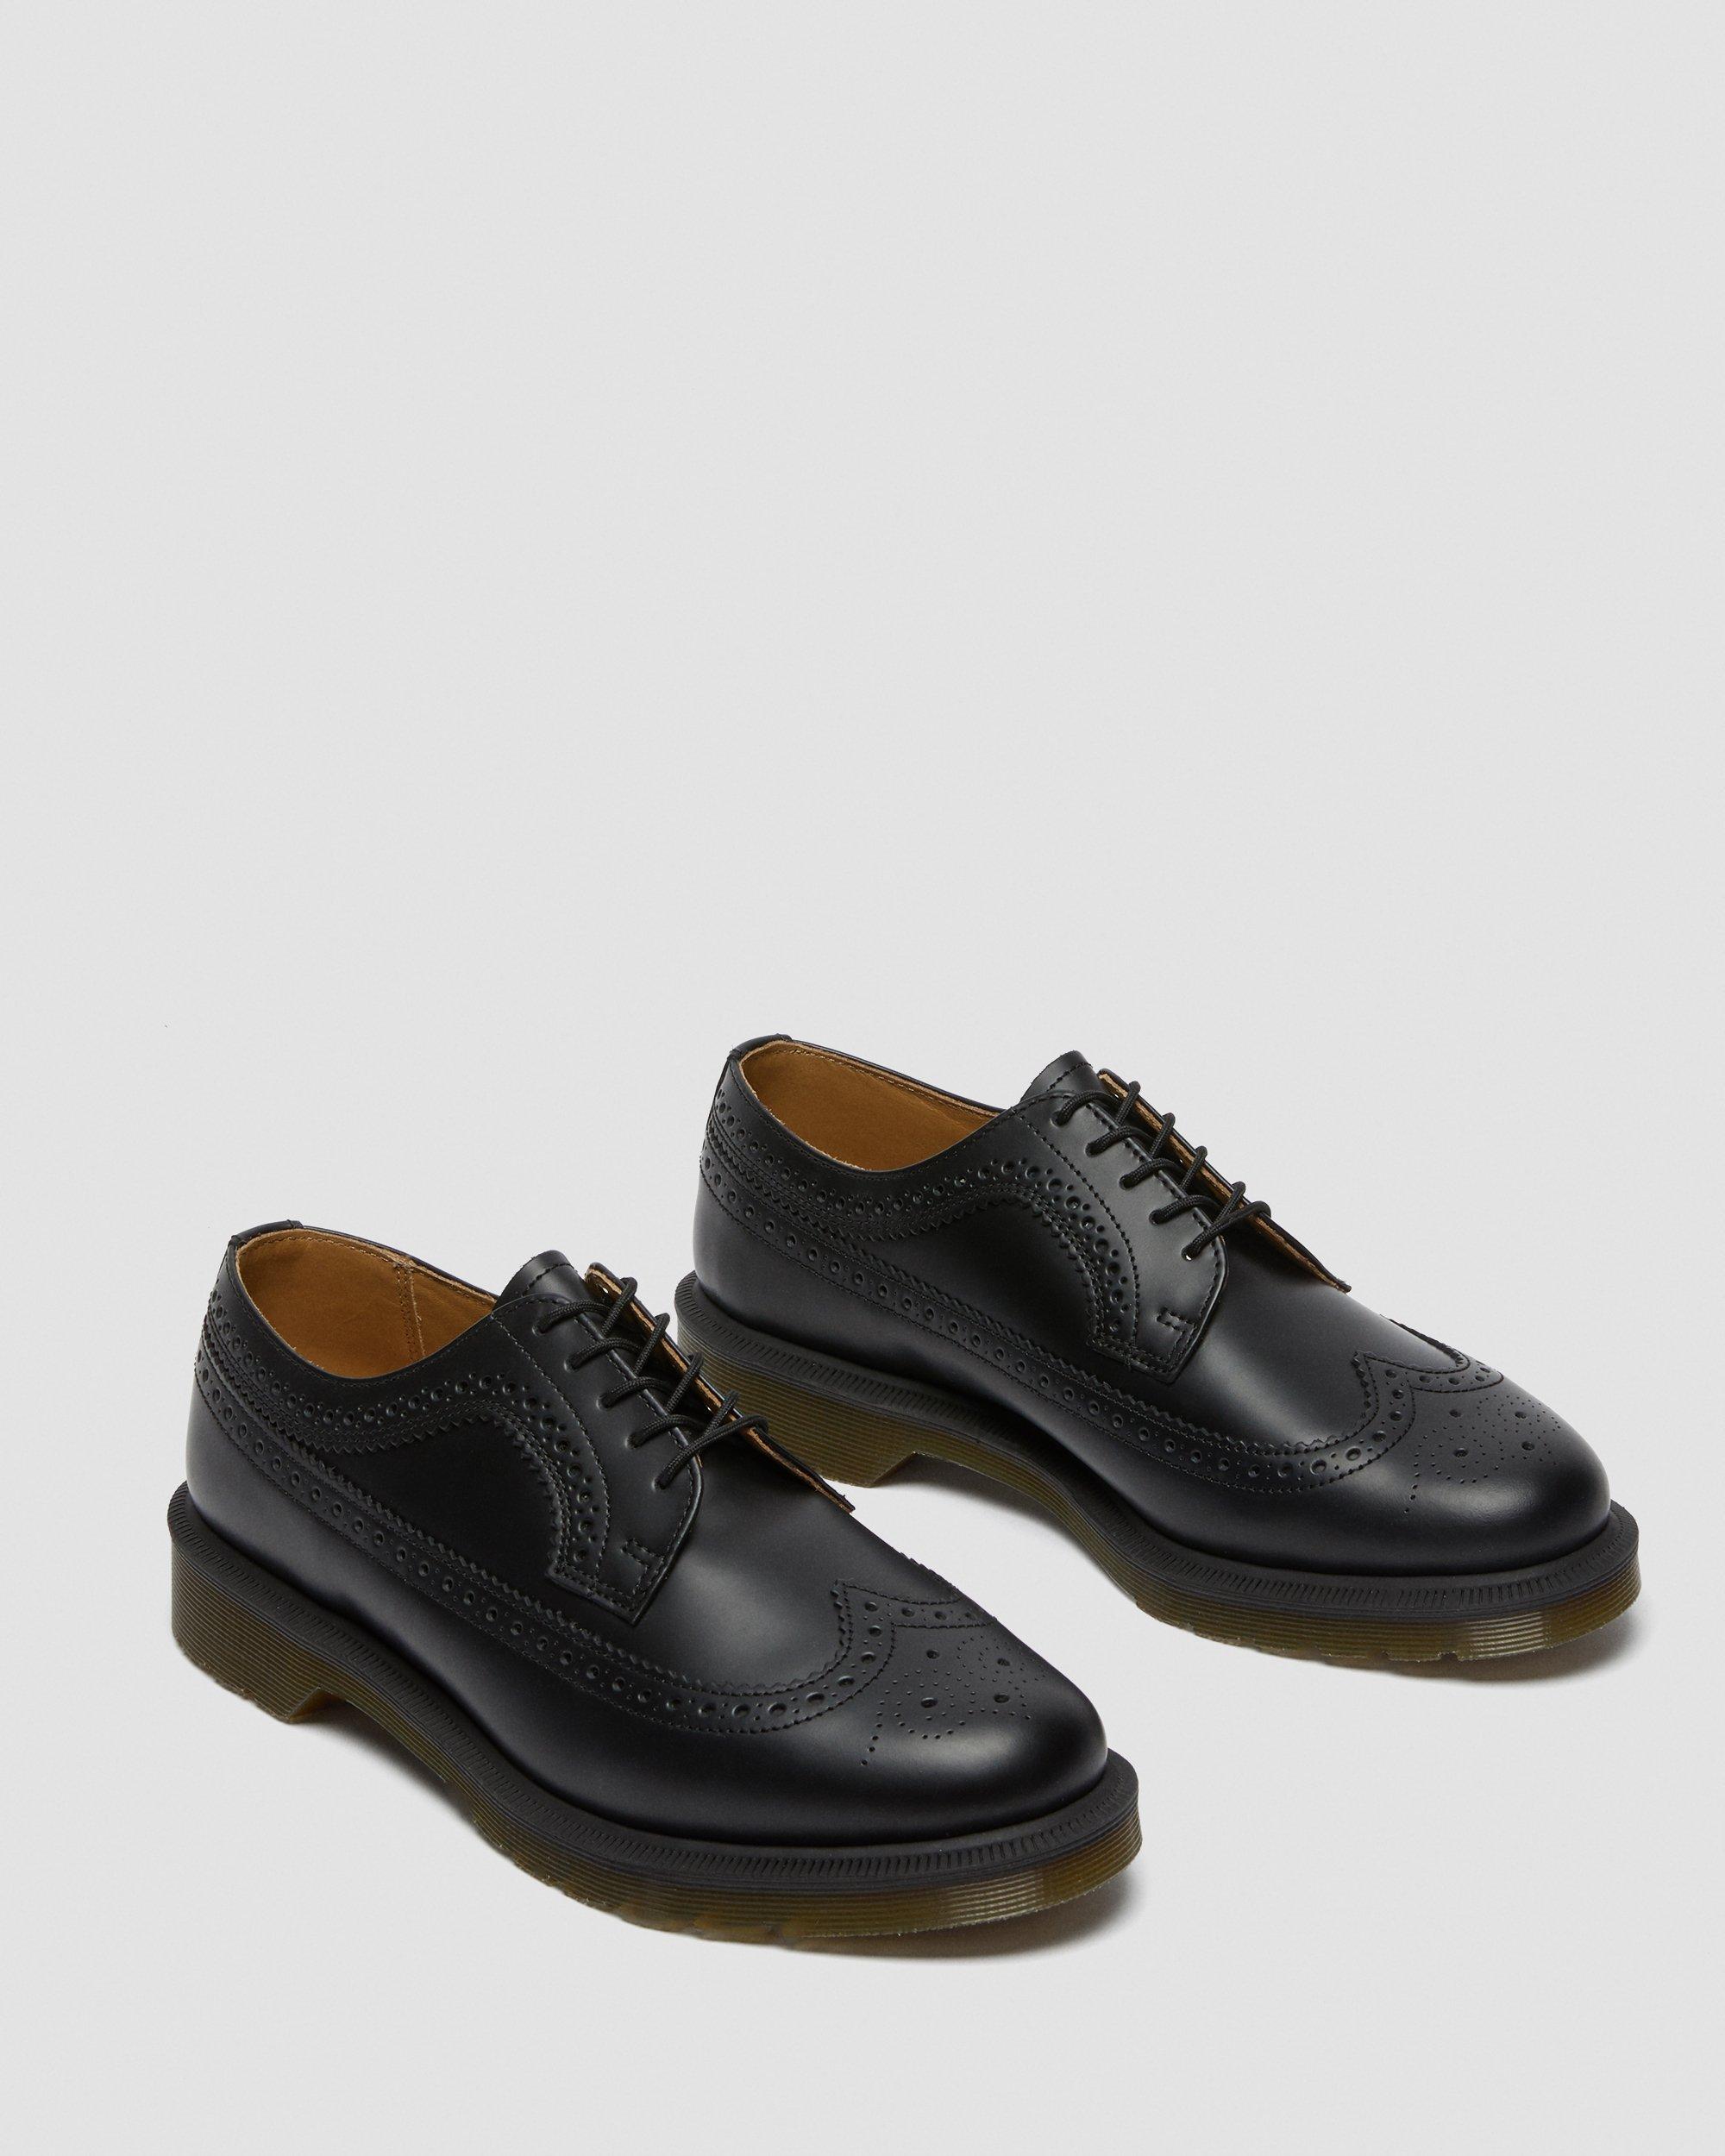 3989 LEATHER BROGUE SHOES Martens